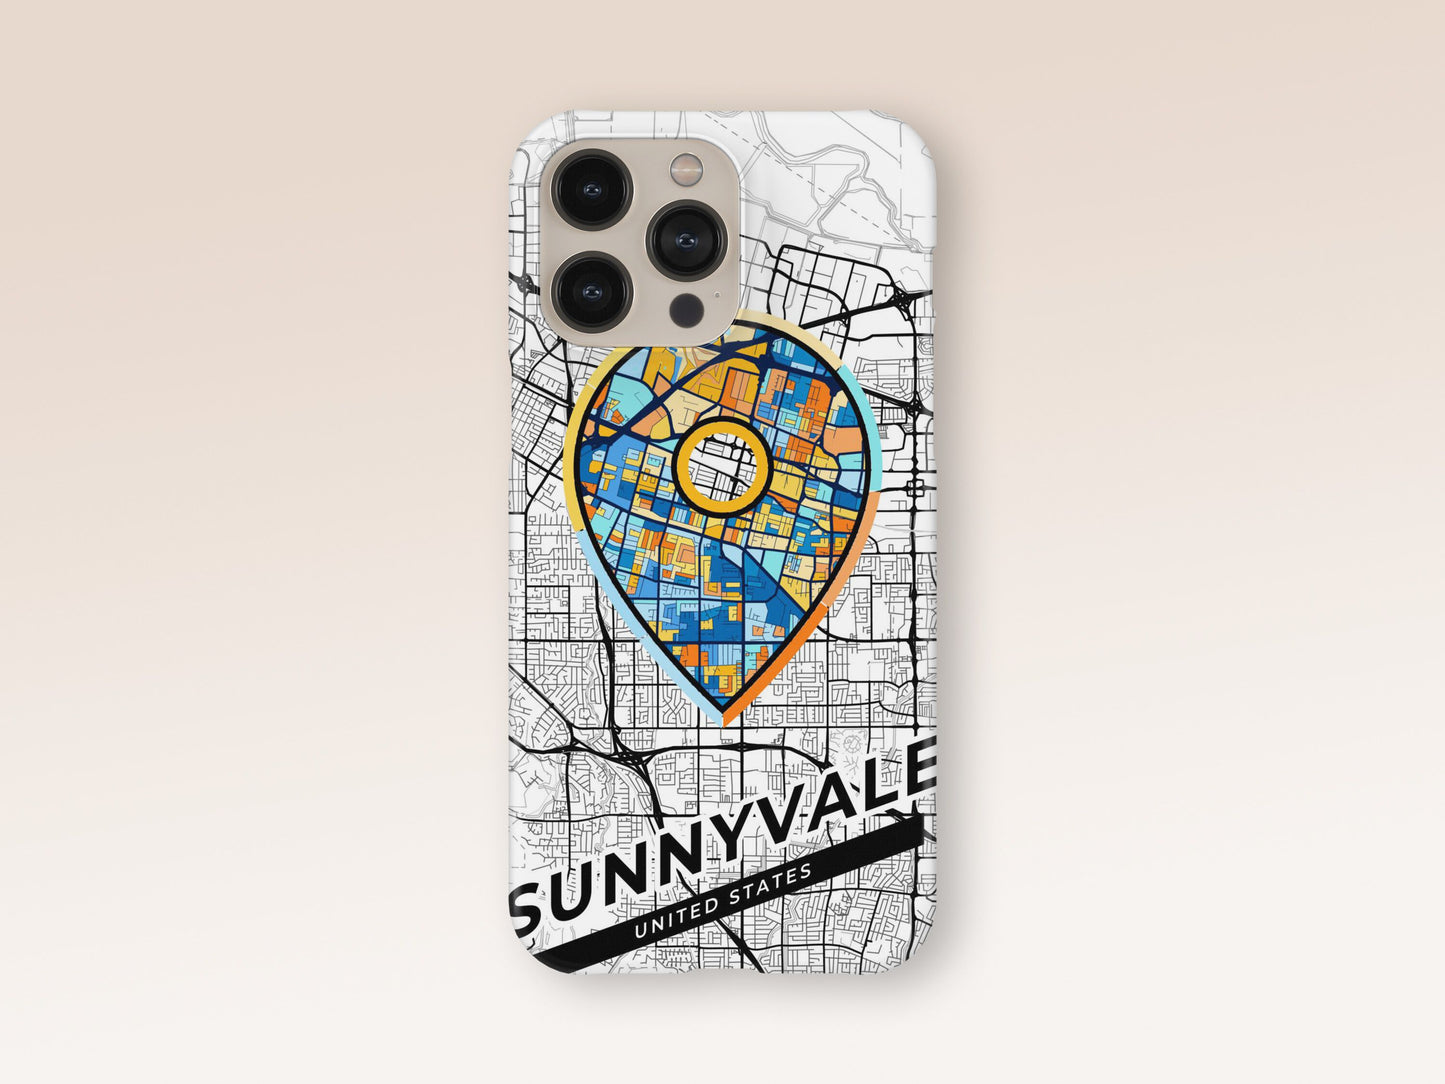 Sunnyvale California slim phone case with colorful icon 1